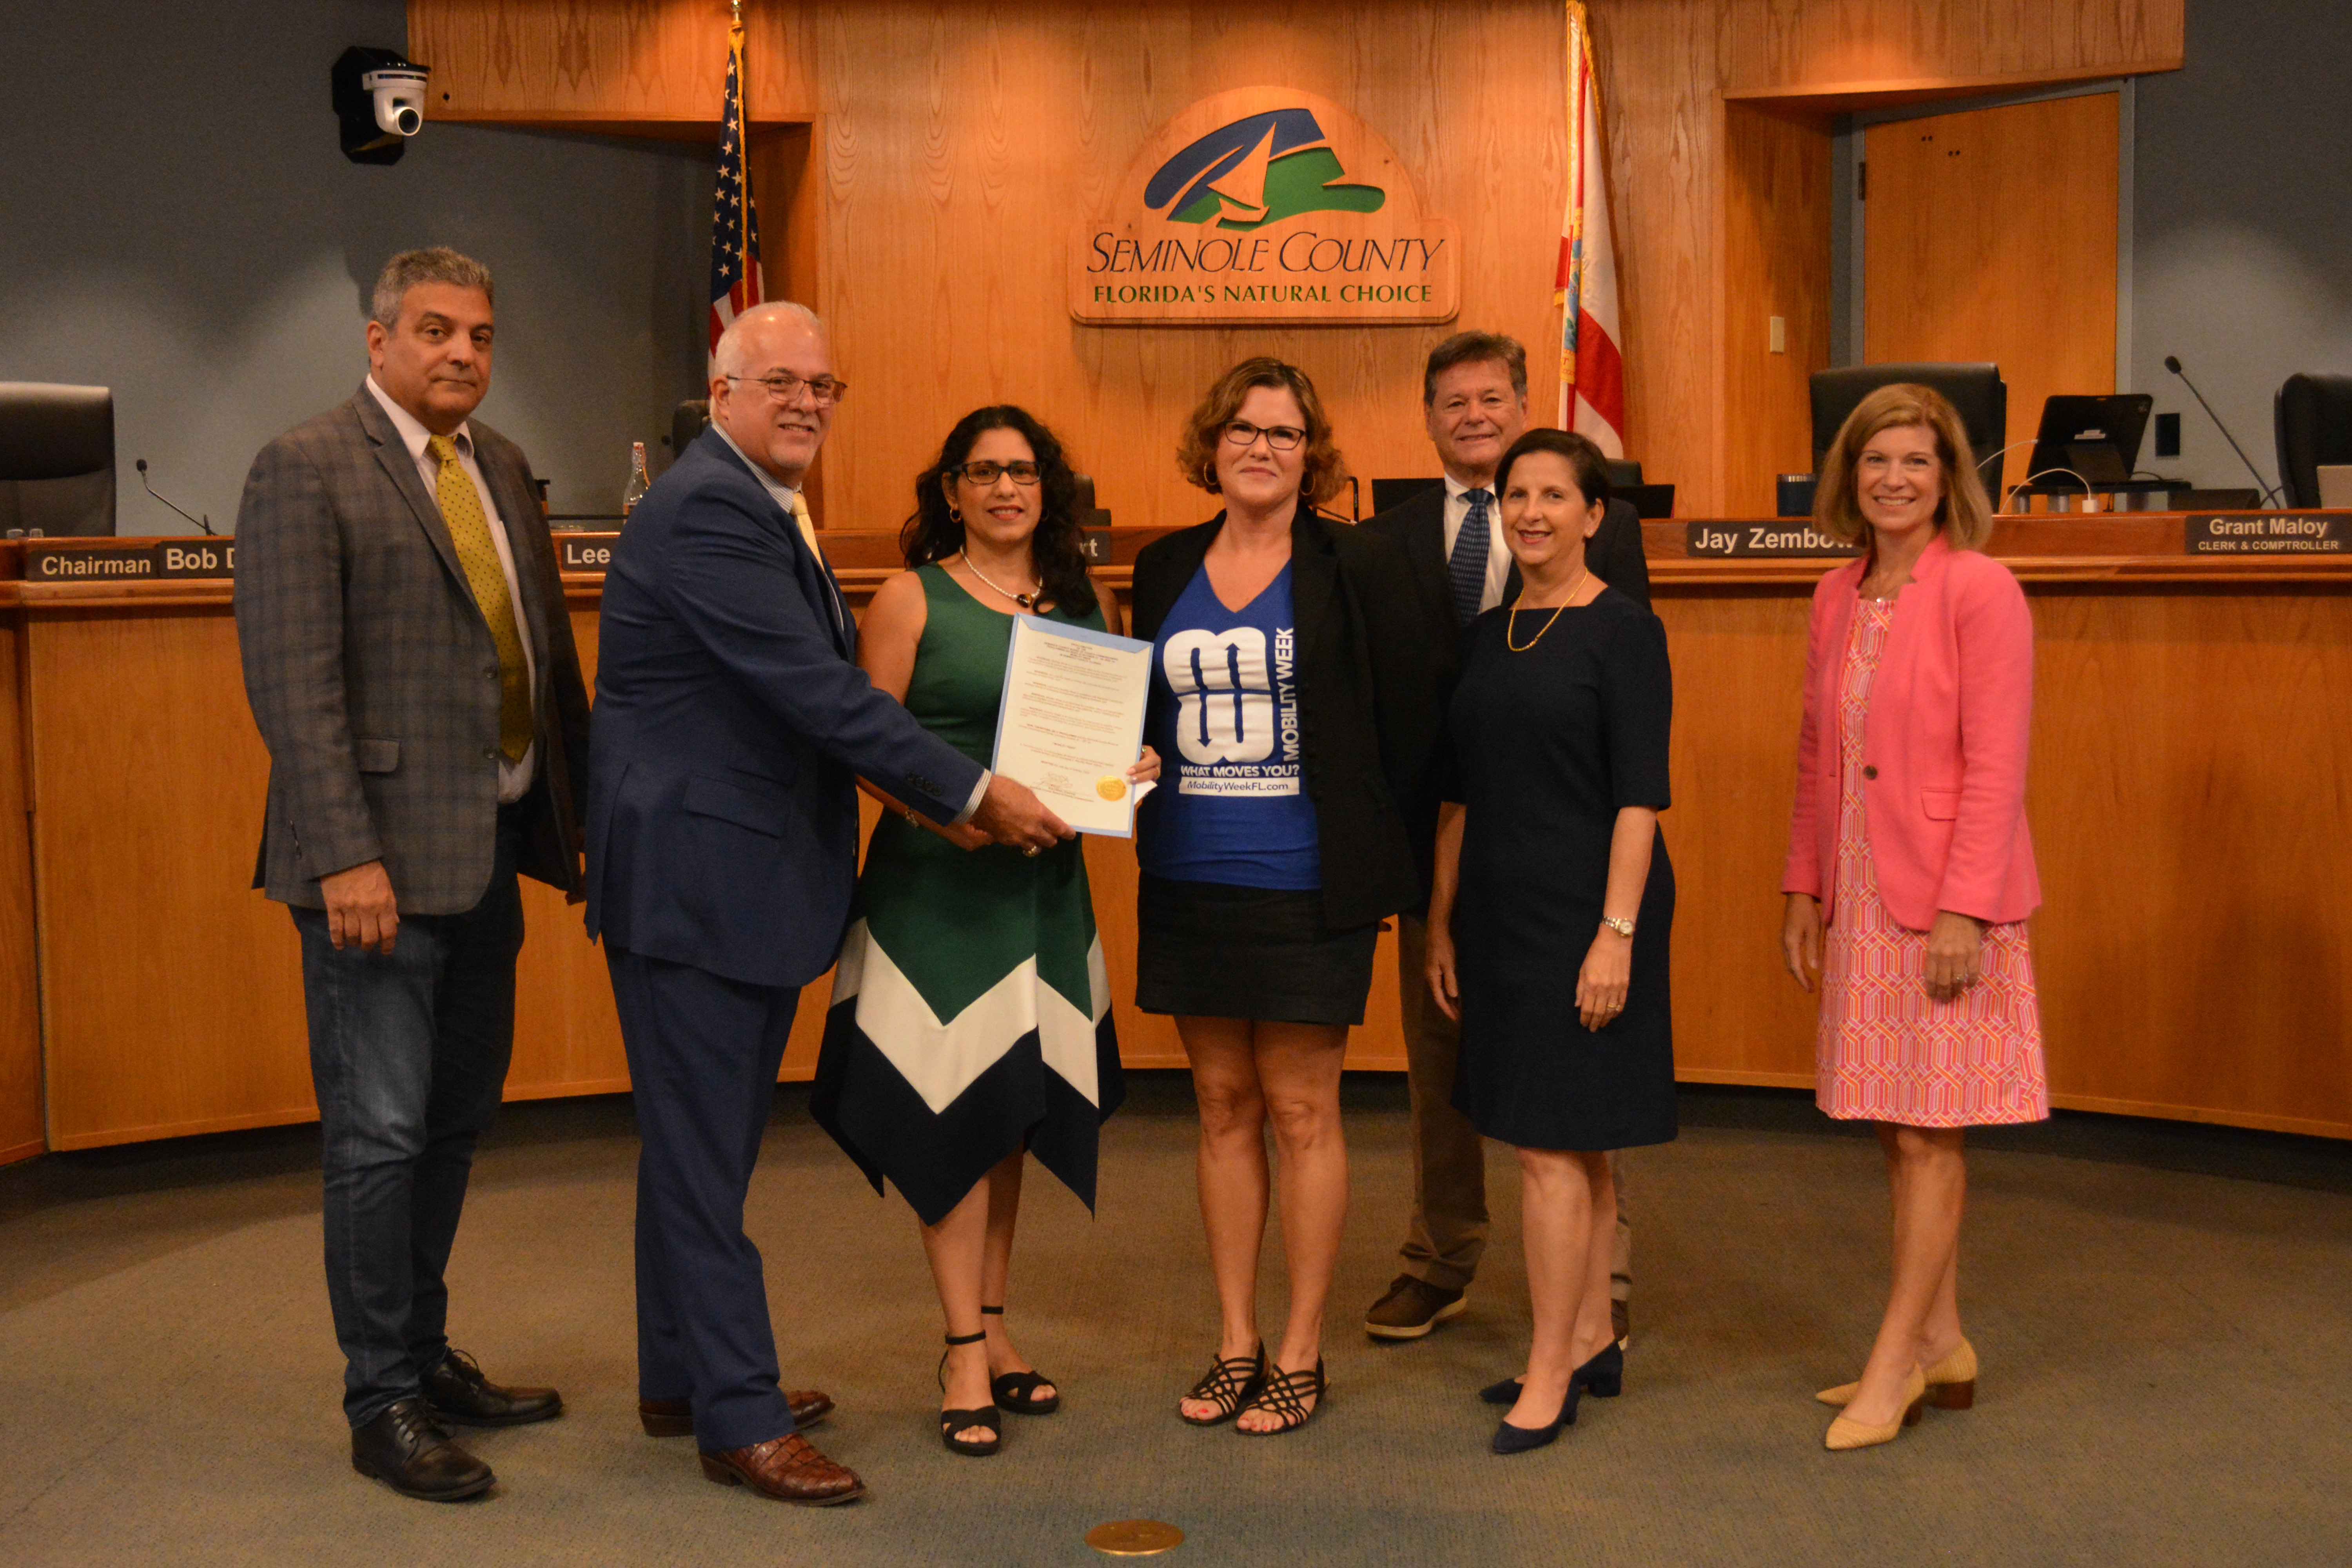 Proclamation — Proclaiming the Week of October 21-28 as Mobility Week in Seminole County. (Stephanie Moss, FDOT Office of Safety)